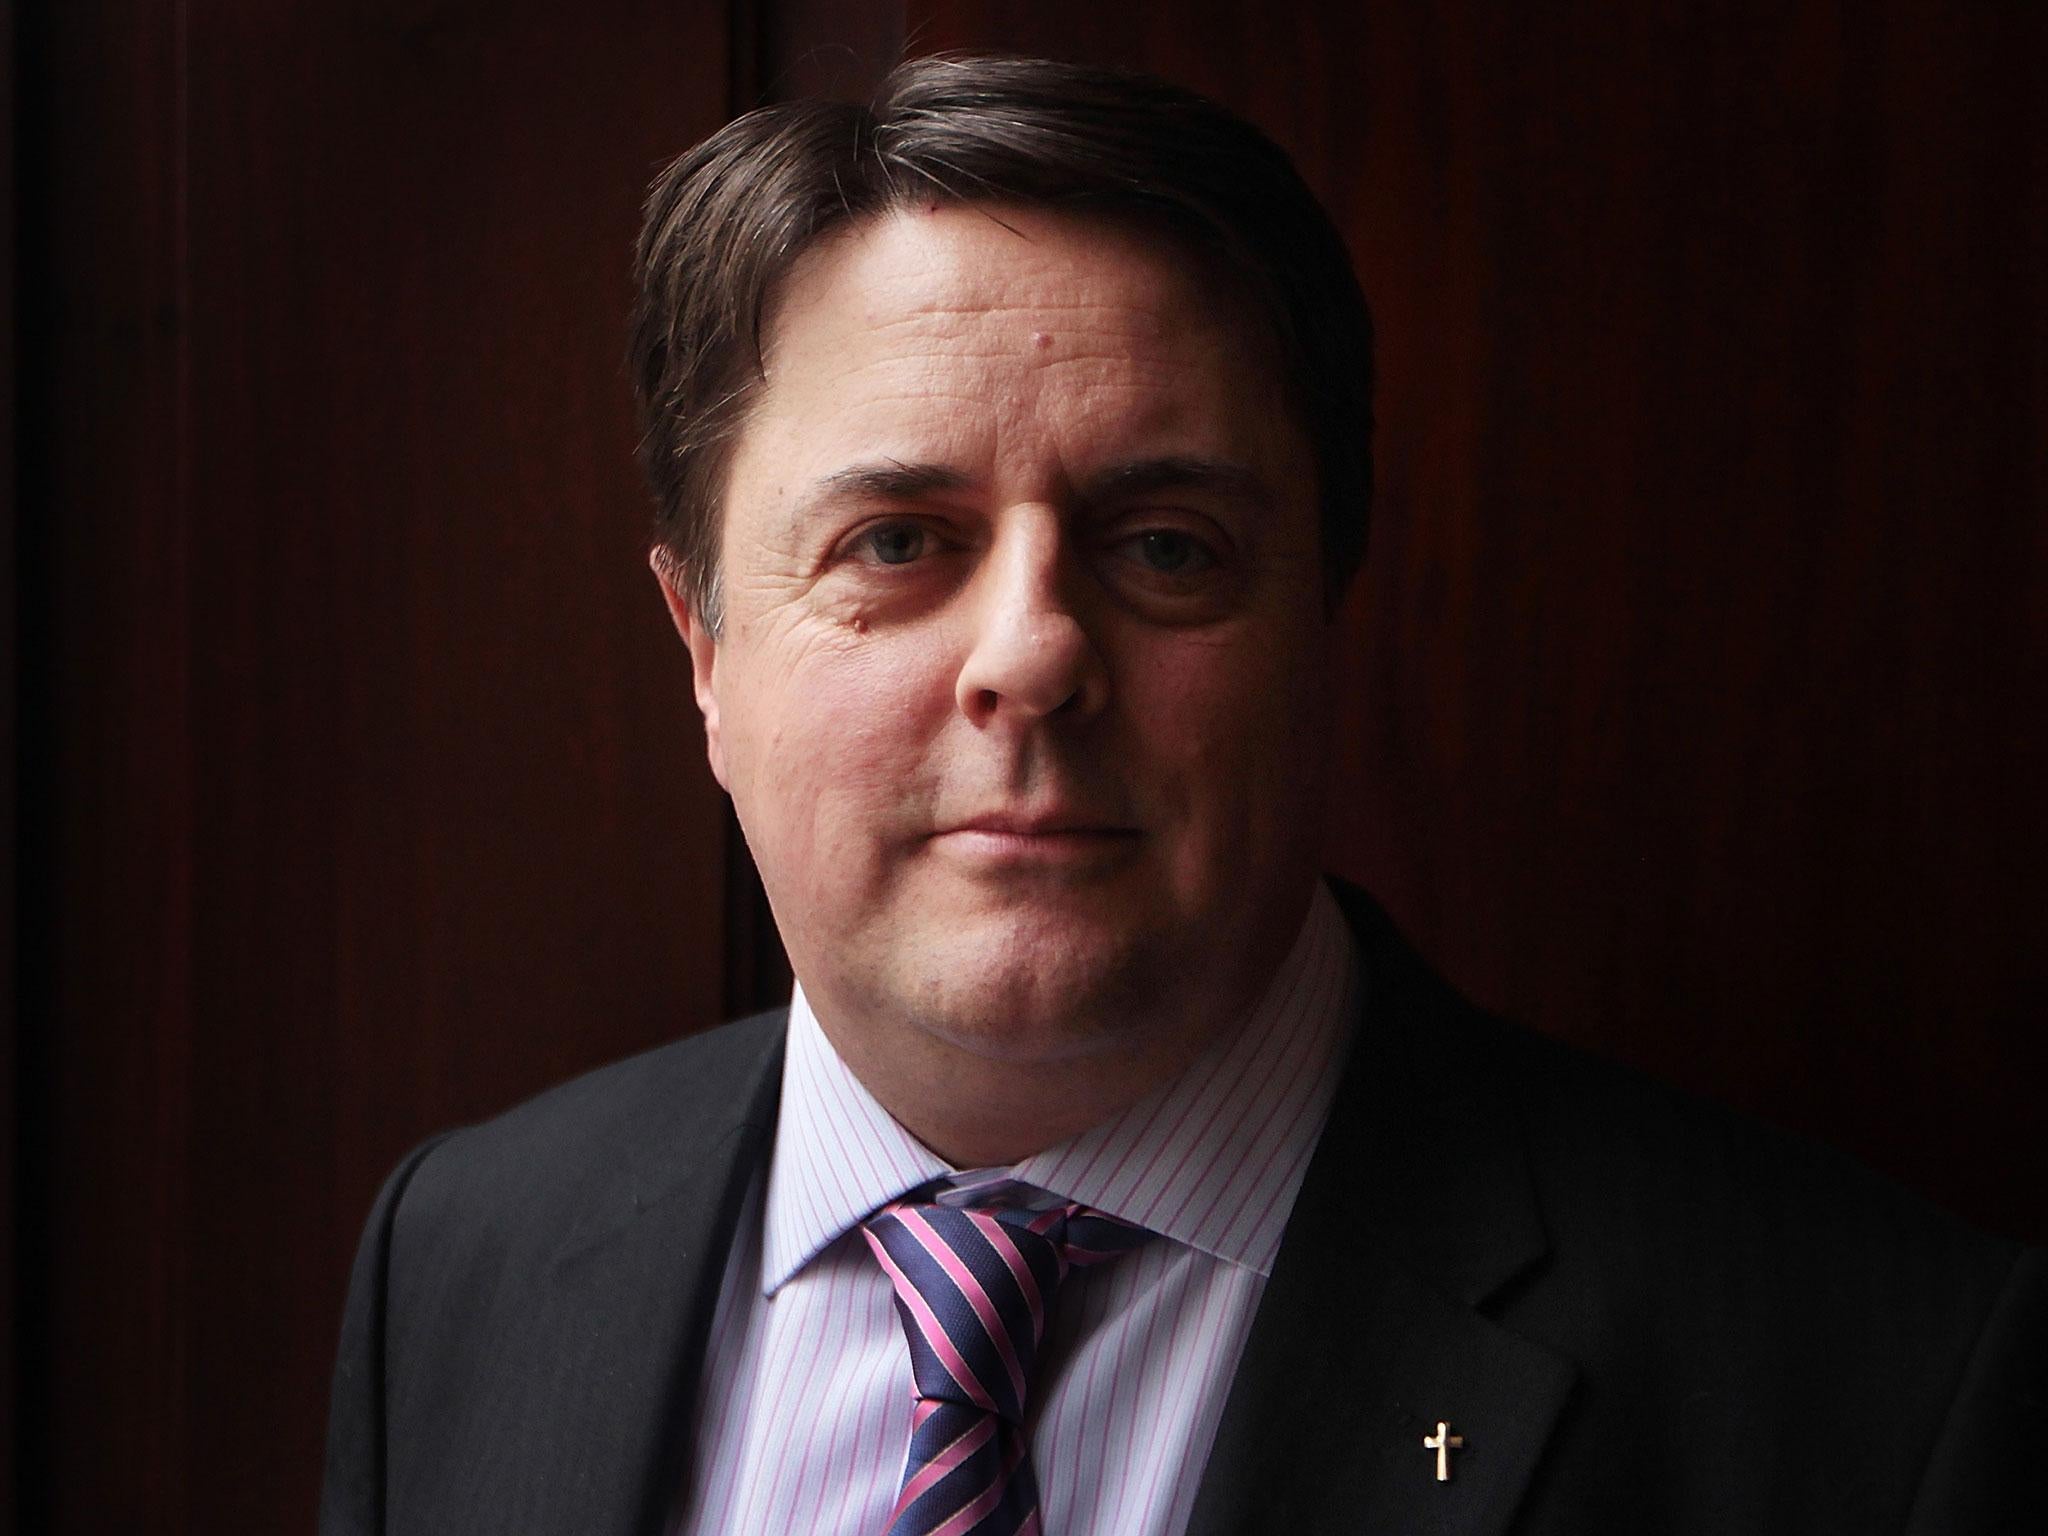 Nick Griffin praised Hungary for building a wall to keep out refugees and providing state help for large Hungarian families